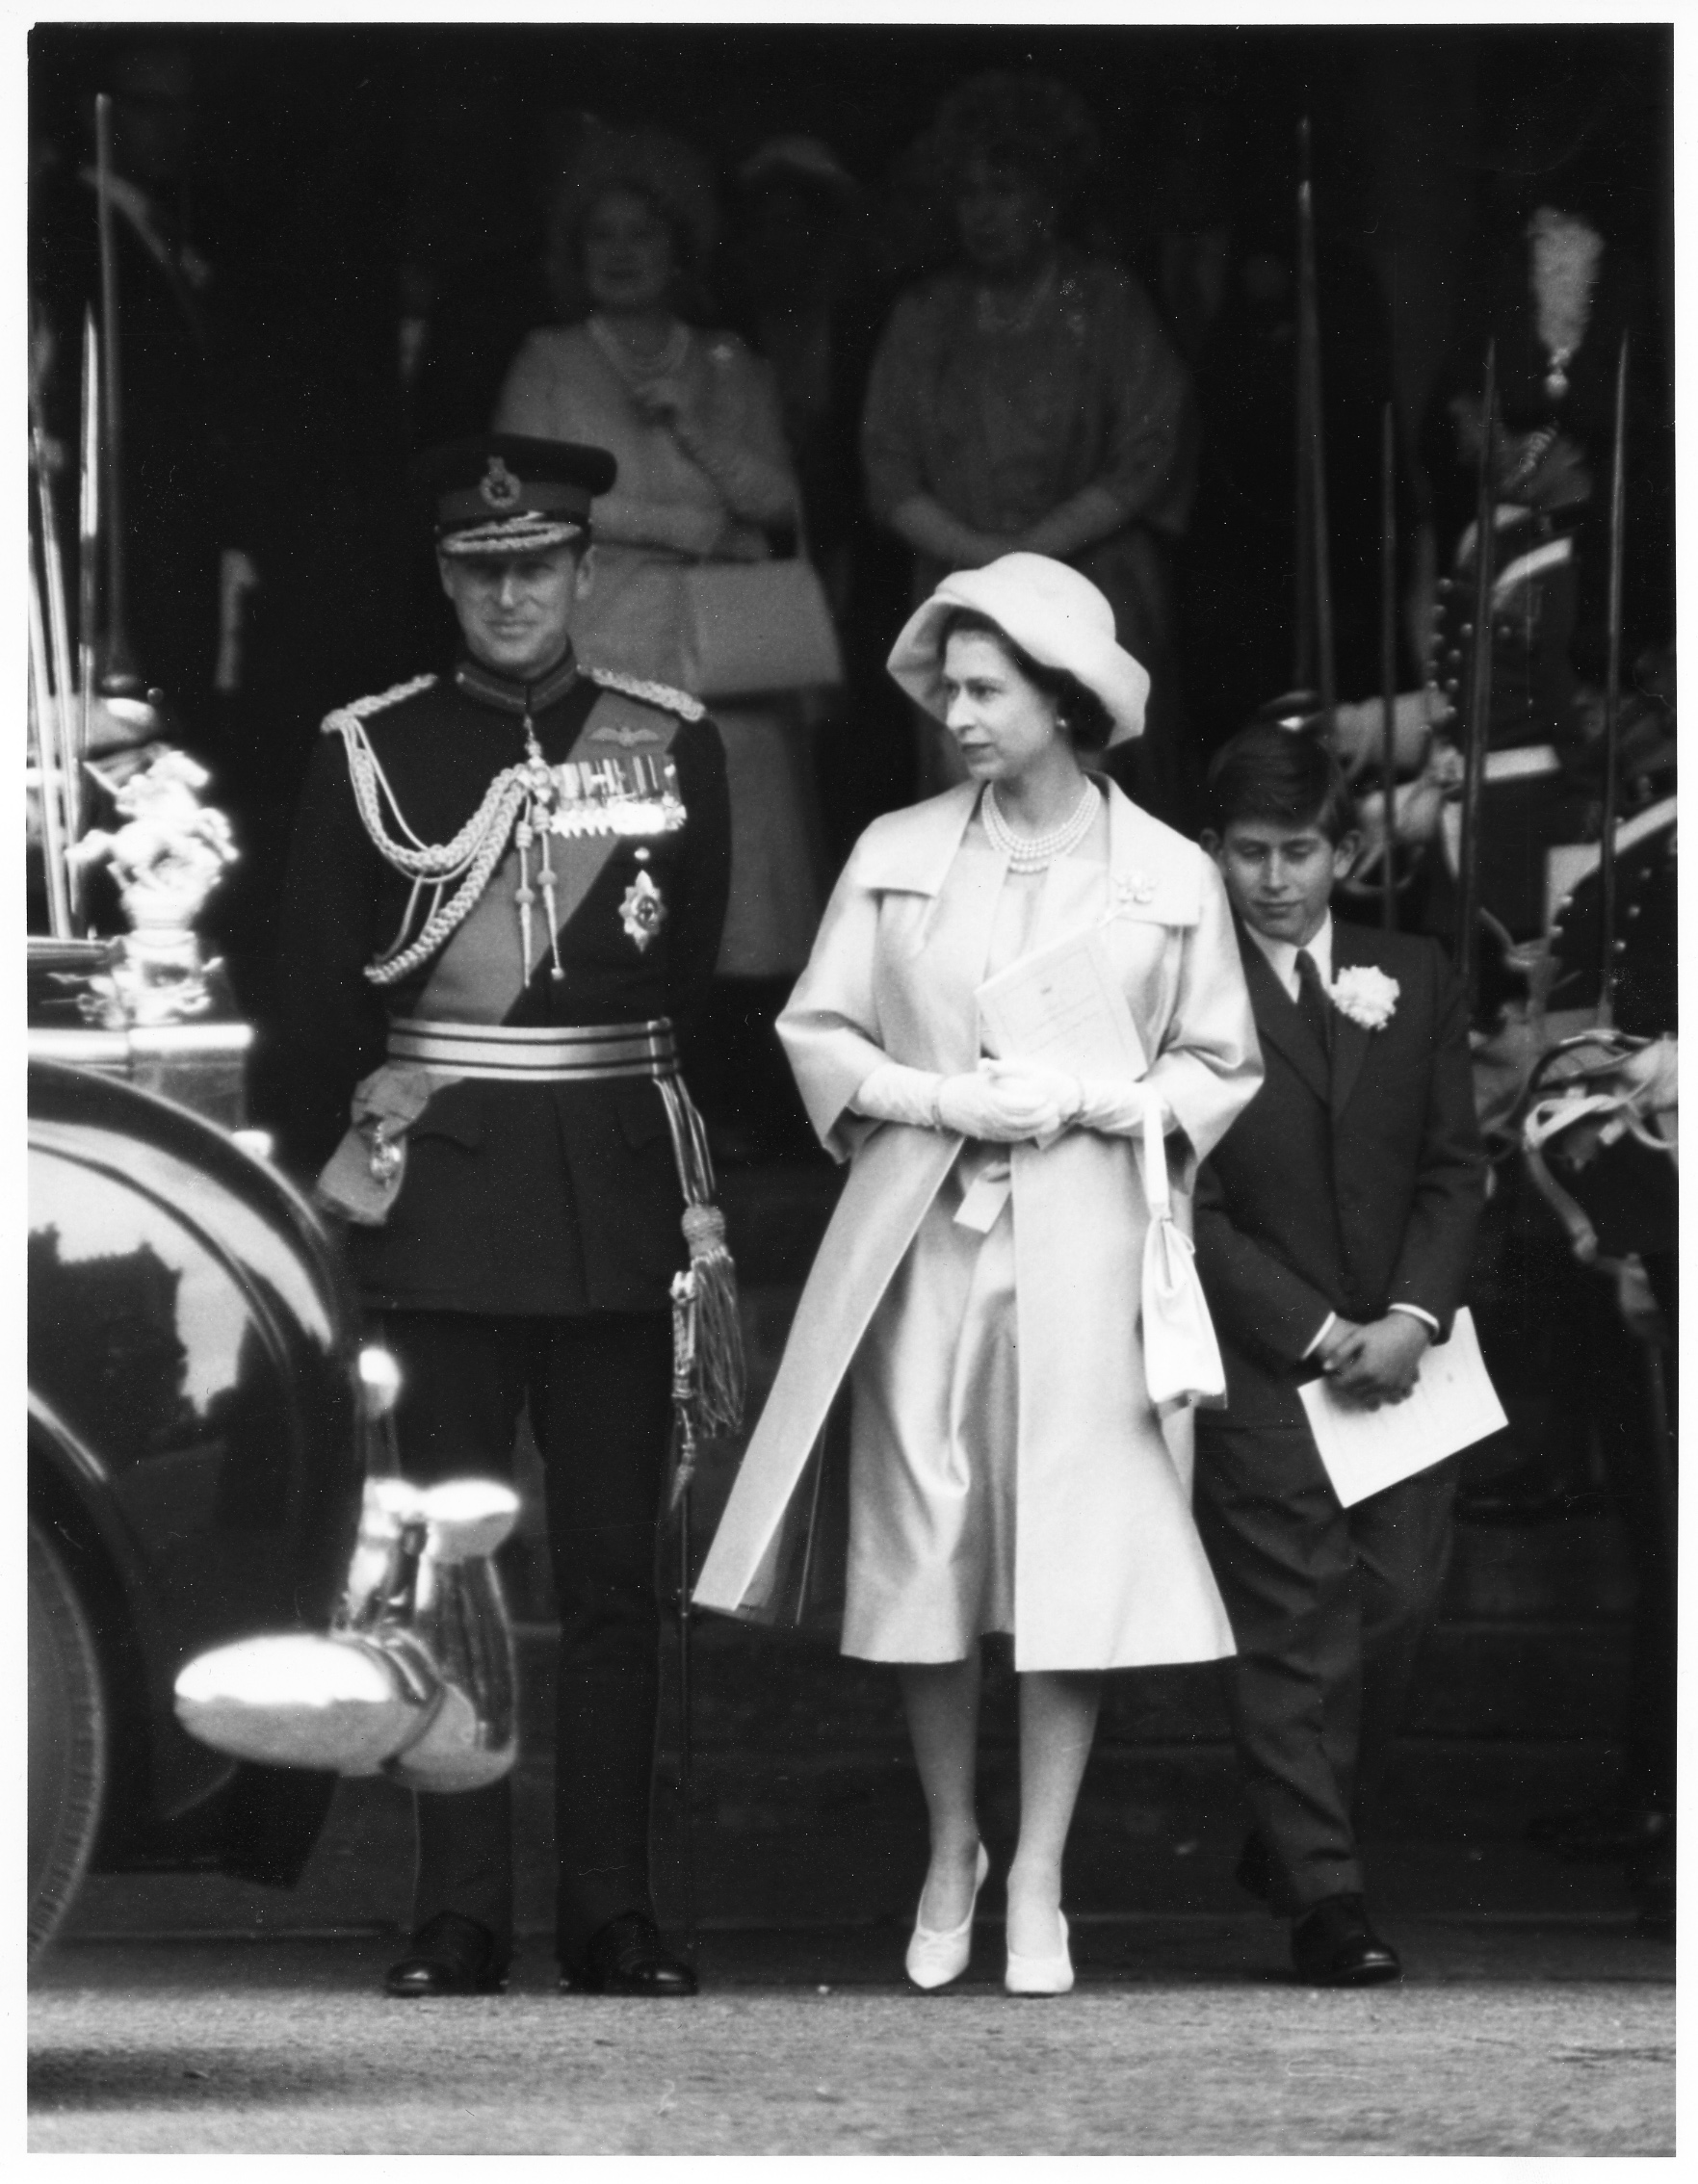 On 8 June 1961, Prince Edward, Duke of Kent and first cousin to the Queen, and Katherine Worsley of Hovingham Hall, North Yorkshire, were married at York Minster. Princess Anne was one of the bridesmaids, and other members of the Royal Family  attended, including the Queen, the Duke of Edinburgh and Prince Charles.